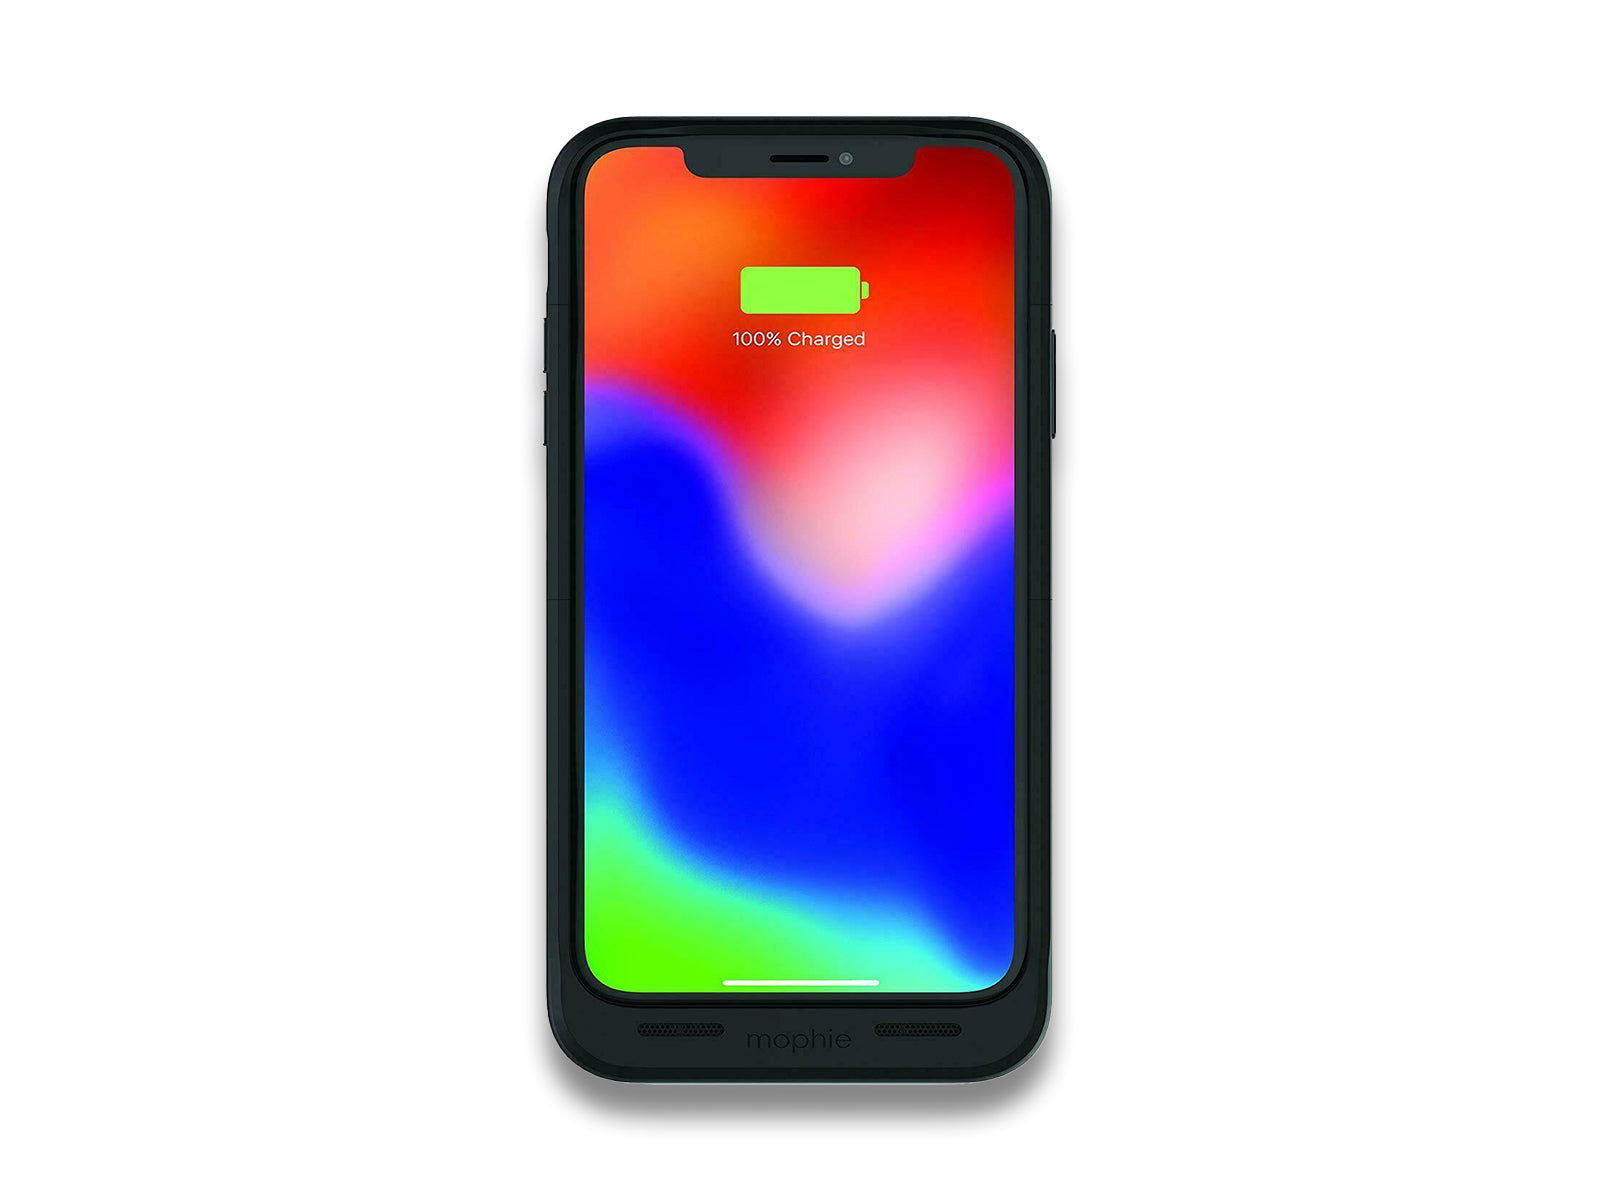 Image shows front view of phone case on white background